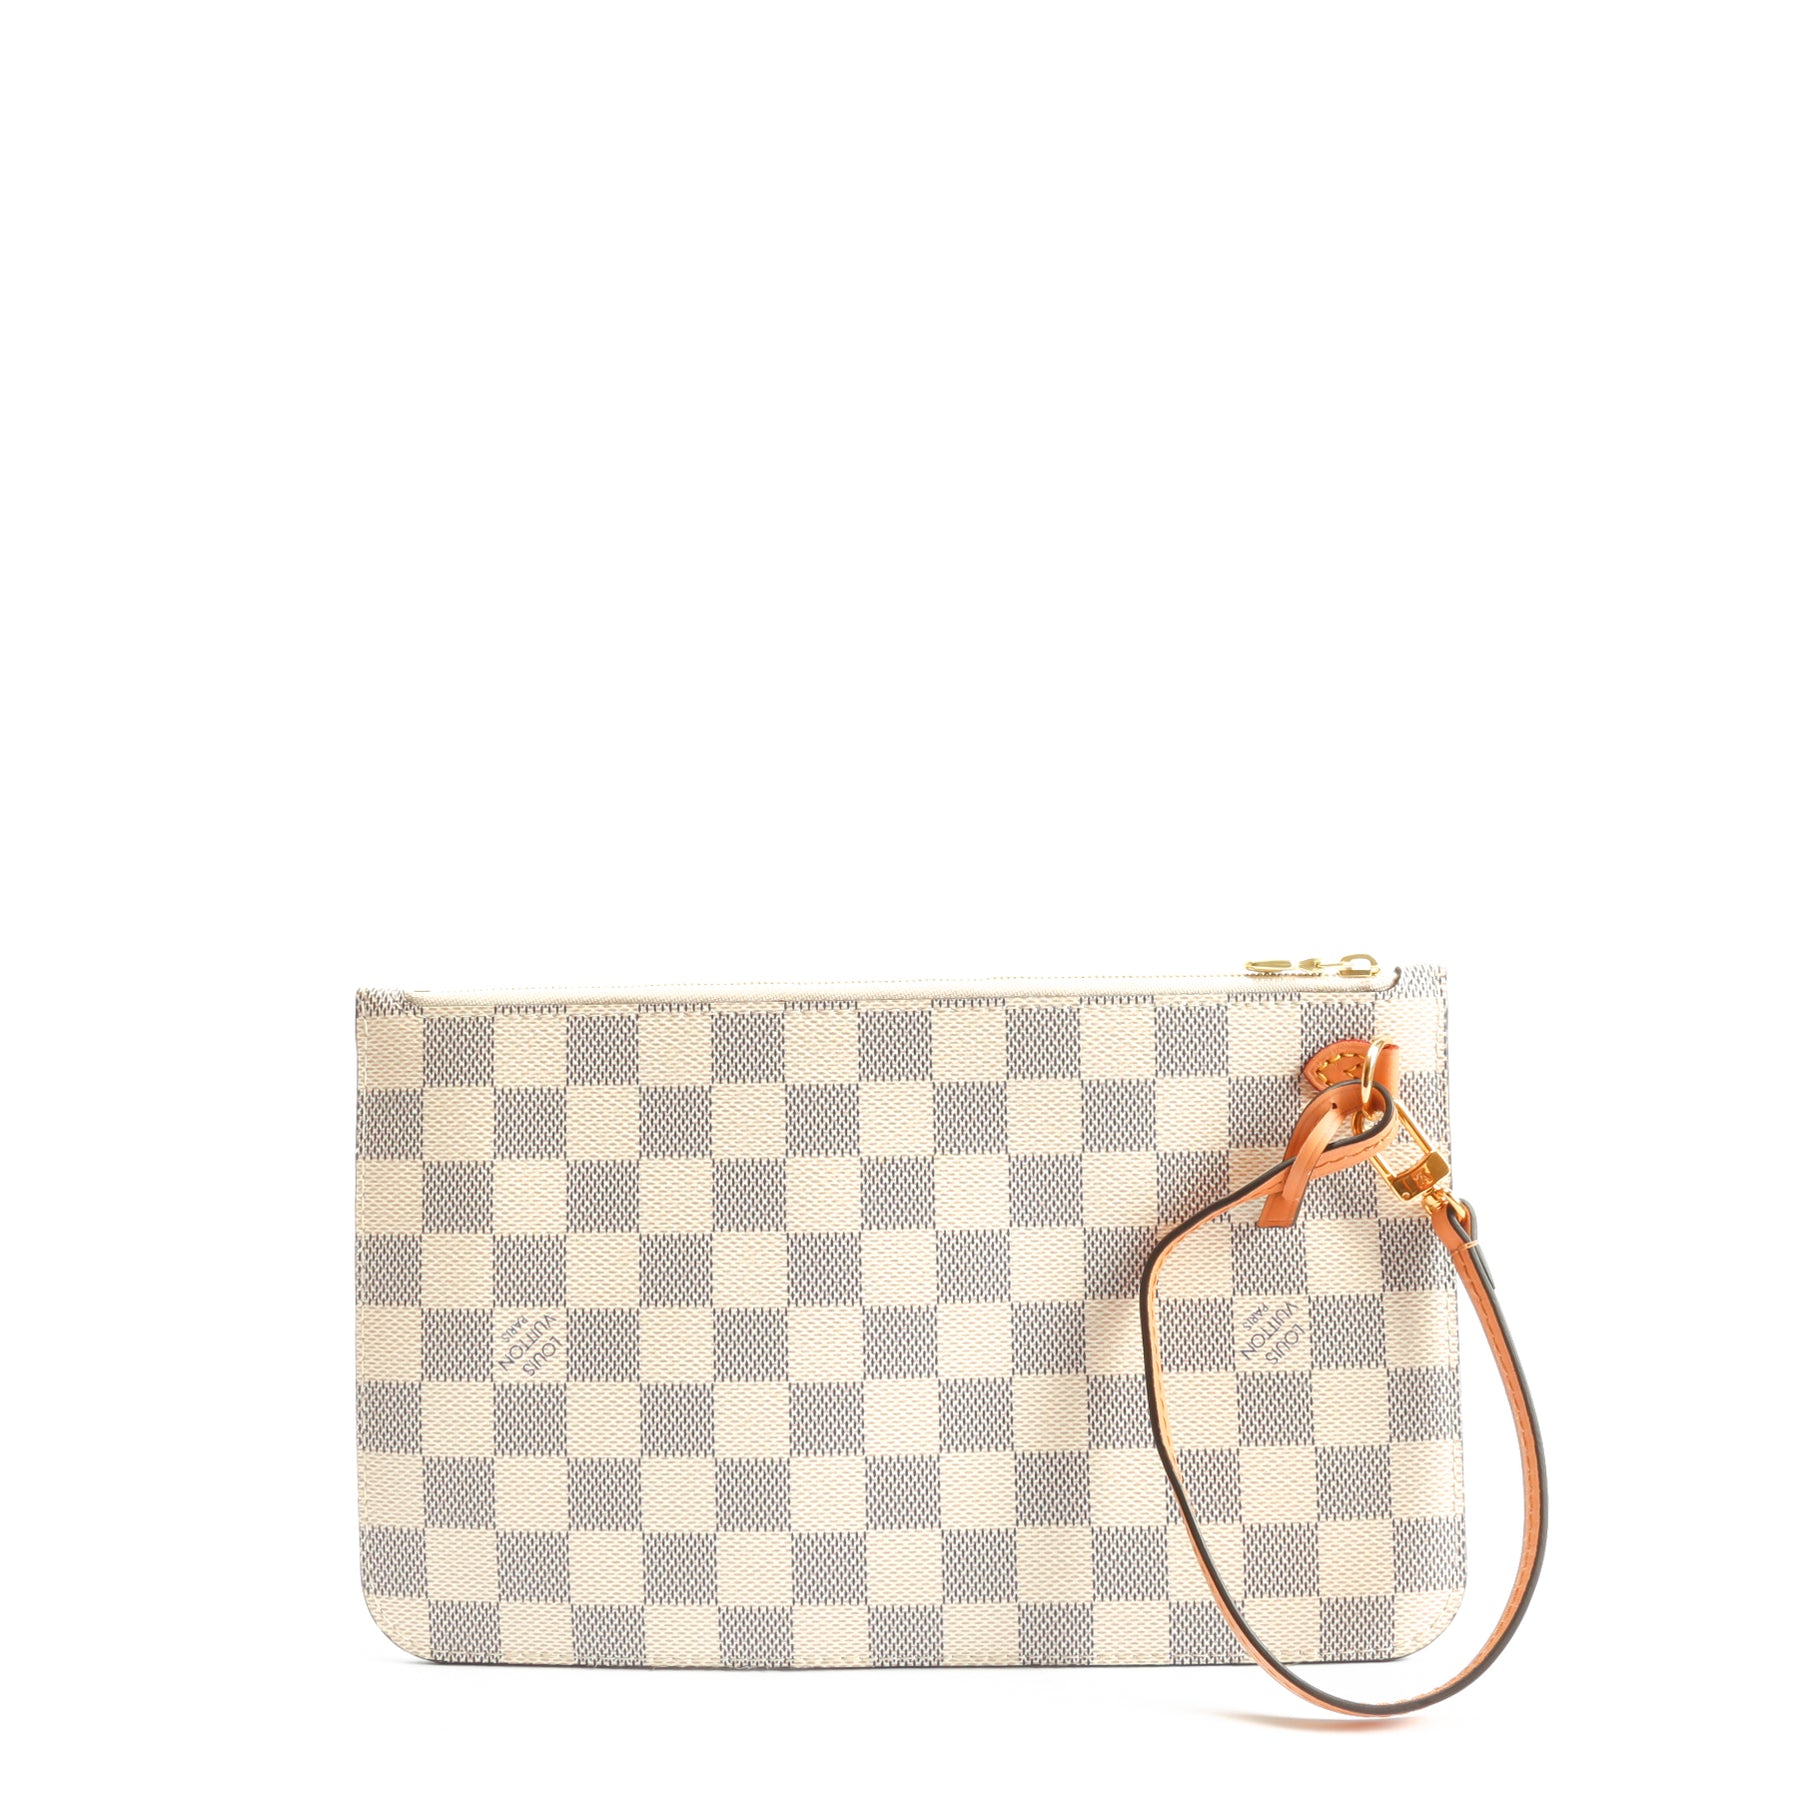 Louis Vuitton Neverfull PM Damier Azur WITH Box, Bag, Pochette and